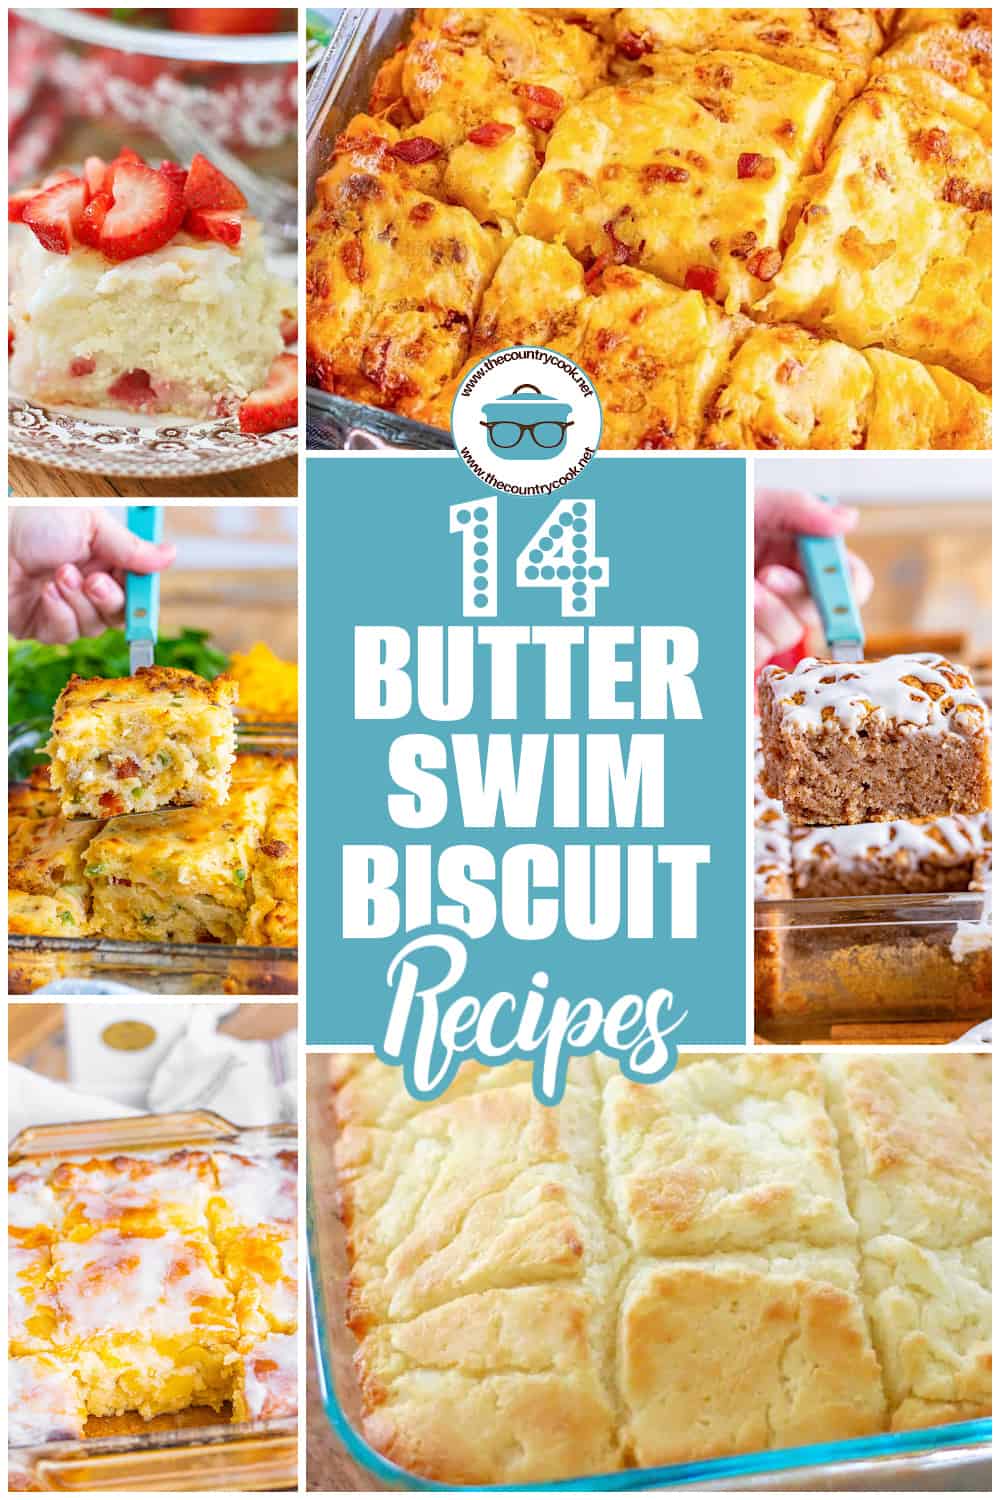 a collage of 6 Butter Swim Biscuit recipe photos with text on the collage that reads "14 Butter Swim Biscuit Recipes".